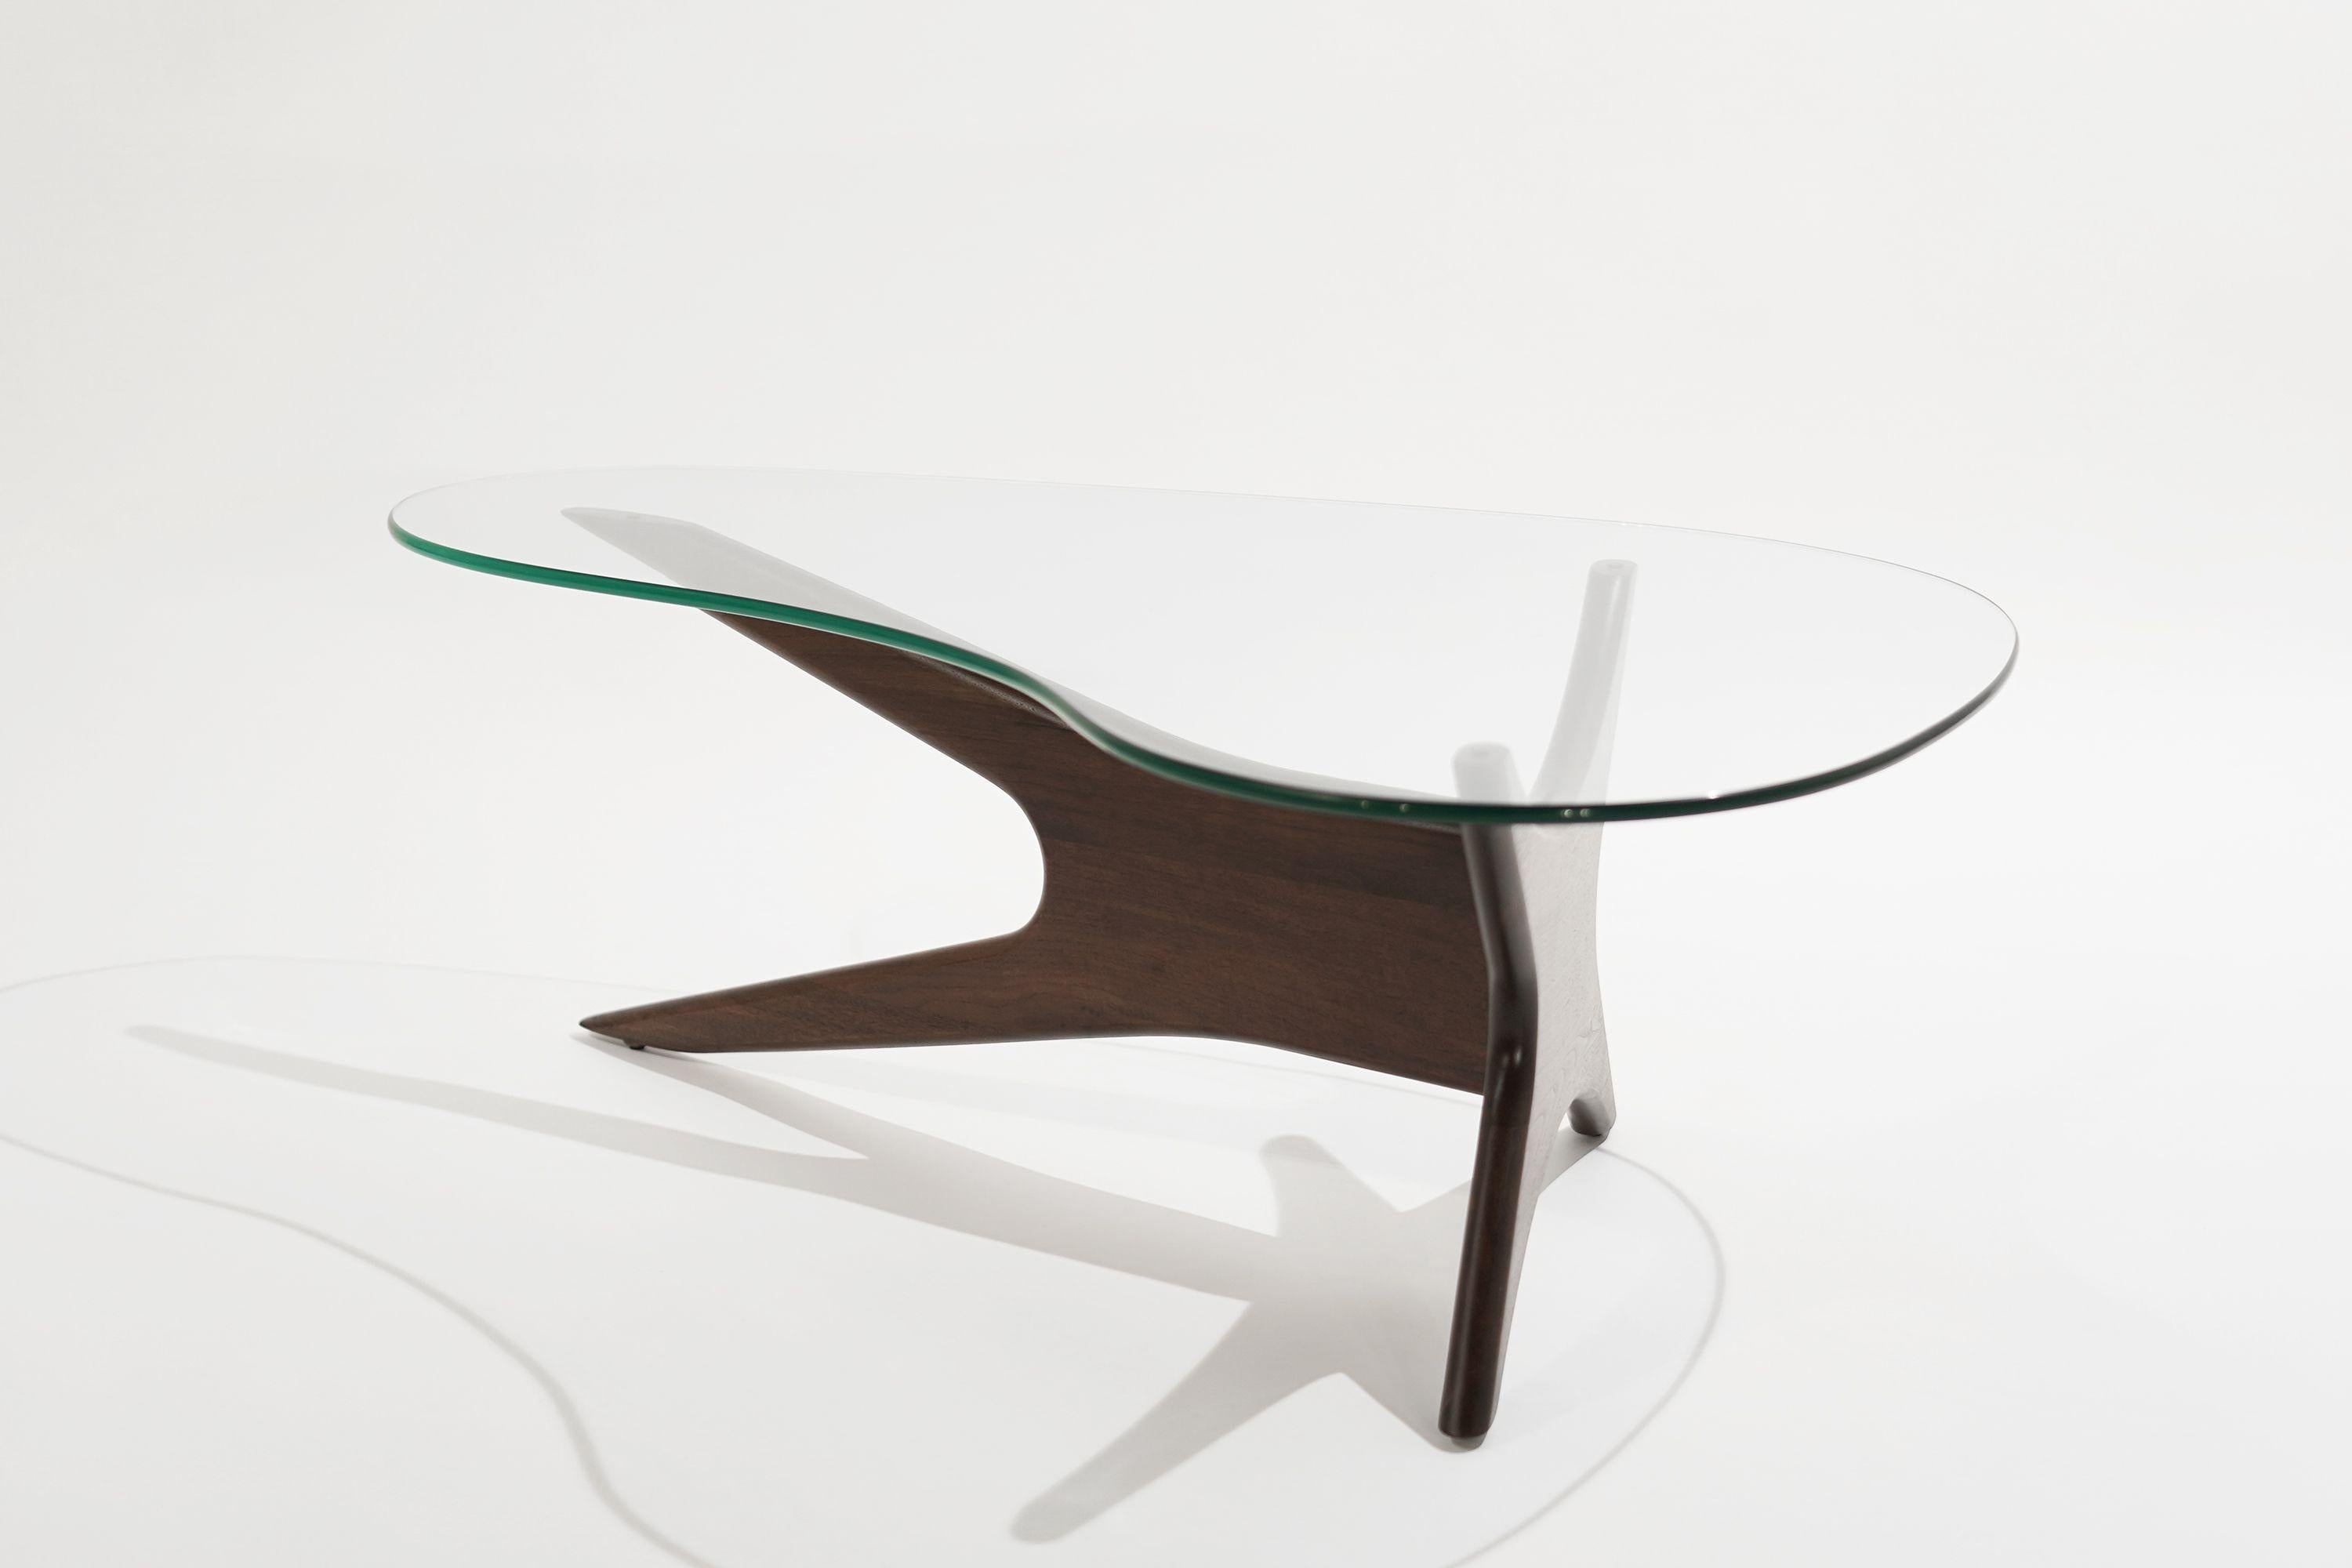 Biomorphic walnut and glass coffee table by Adrian Pearsall for Craft Associates, circa 1950s.
Sculptural walnut base fully restored. New custom-made kidney-shaped glass top.

Other designers from this period include Ico Parisi, Vladimir Kagan,